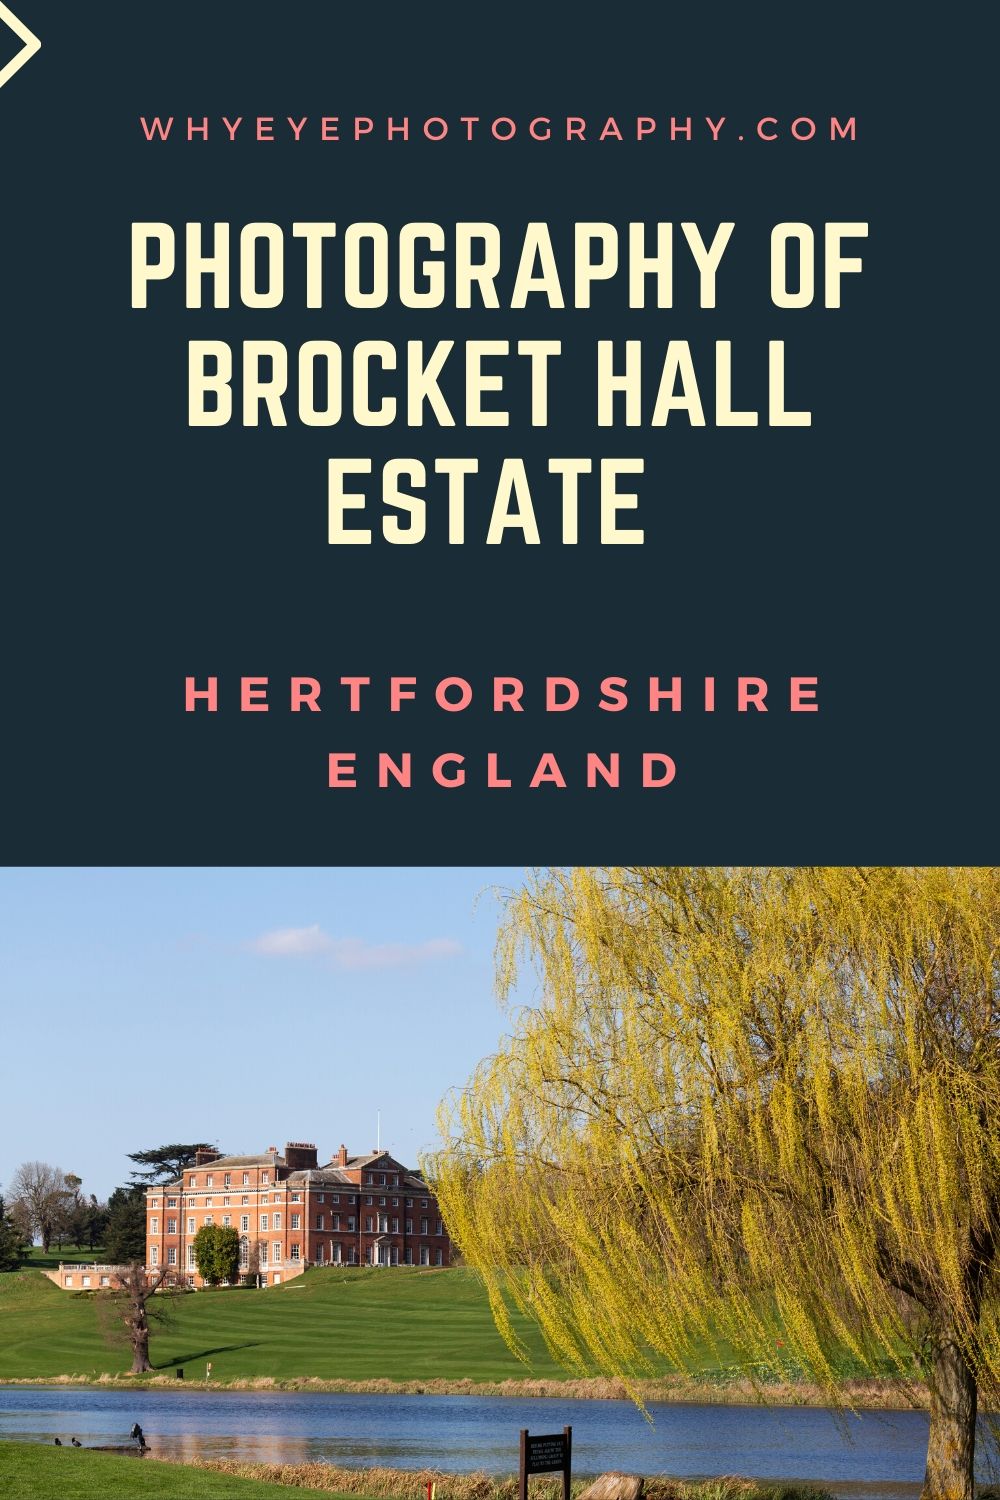 Pinterest pin about photography of Brocket Hall Estate in Hertfordshire with photographs by Stuart Forster of Why Eye Photography.